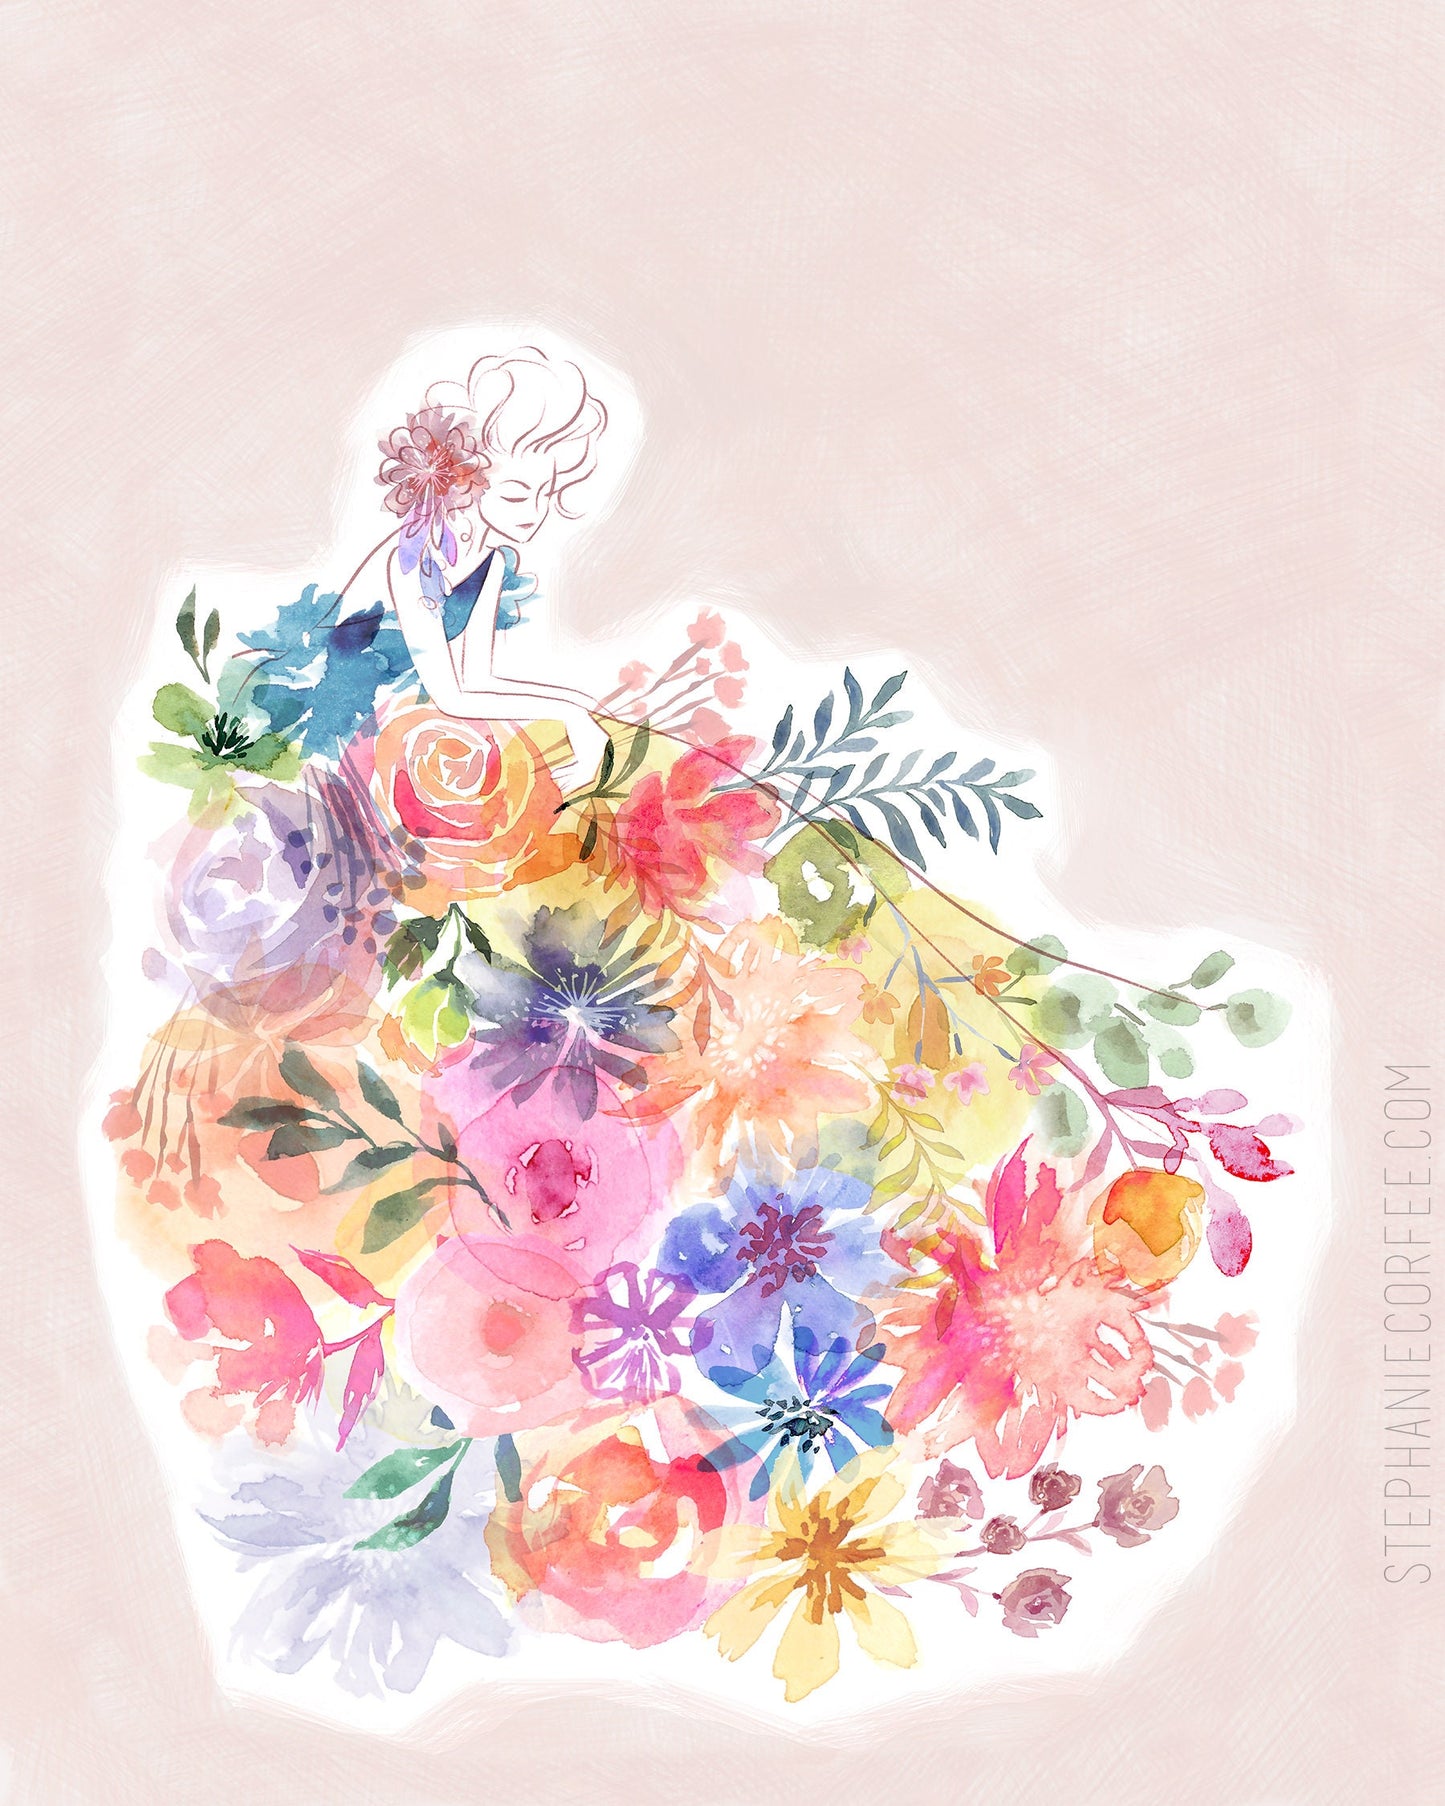 Meadow Gown - PRINT, floral, watercolor, face, head, feminine, pastel, flowers, leaves, fashion, ballgown, girlie